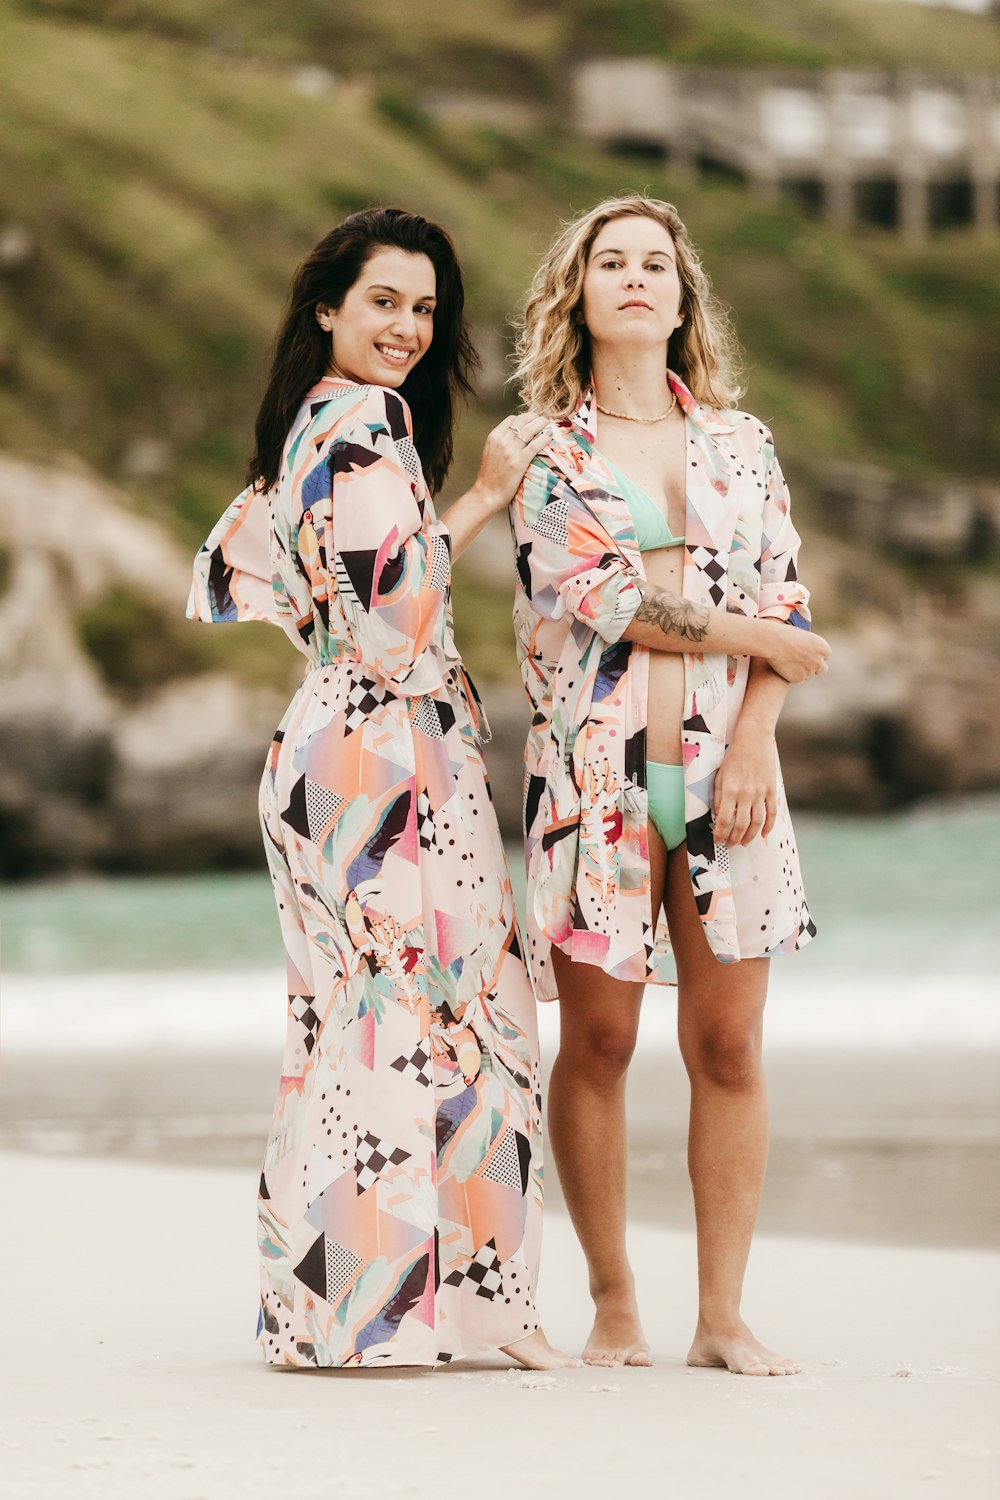 2 women in white red and blue floral dress standing on gray sand during daytime